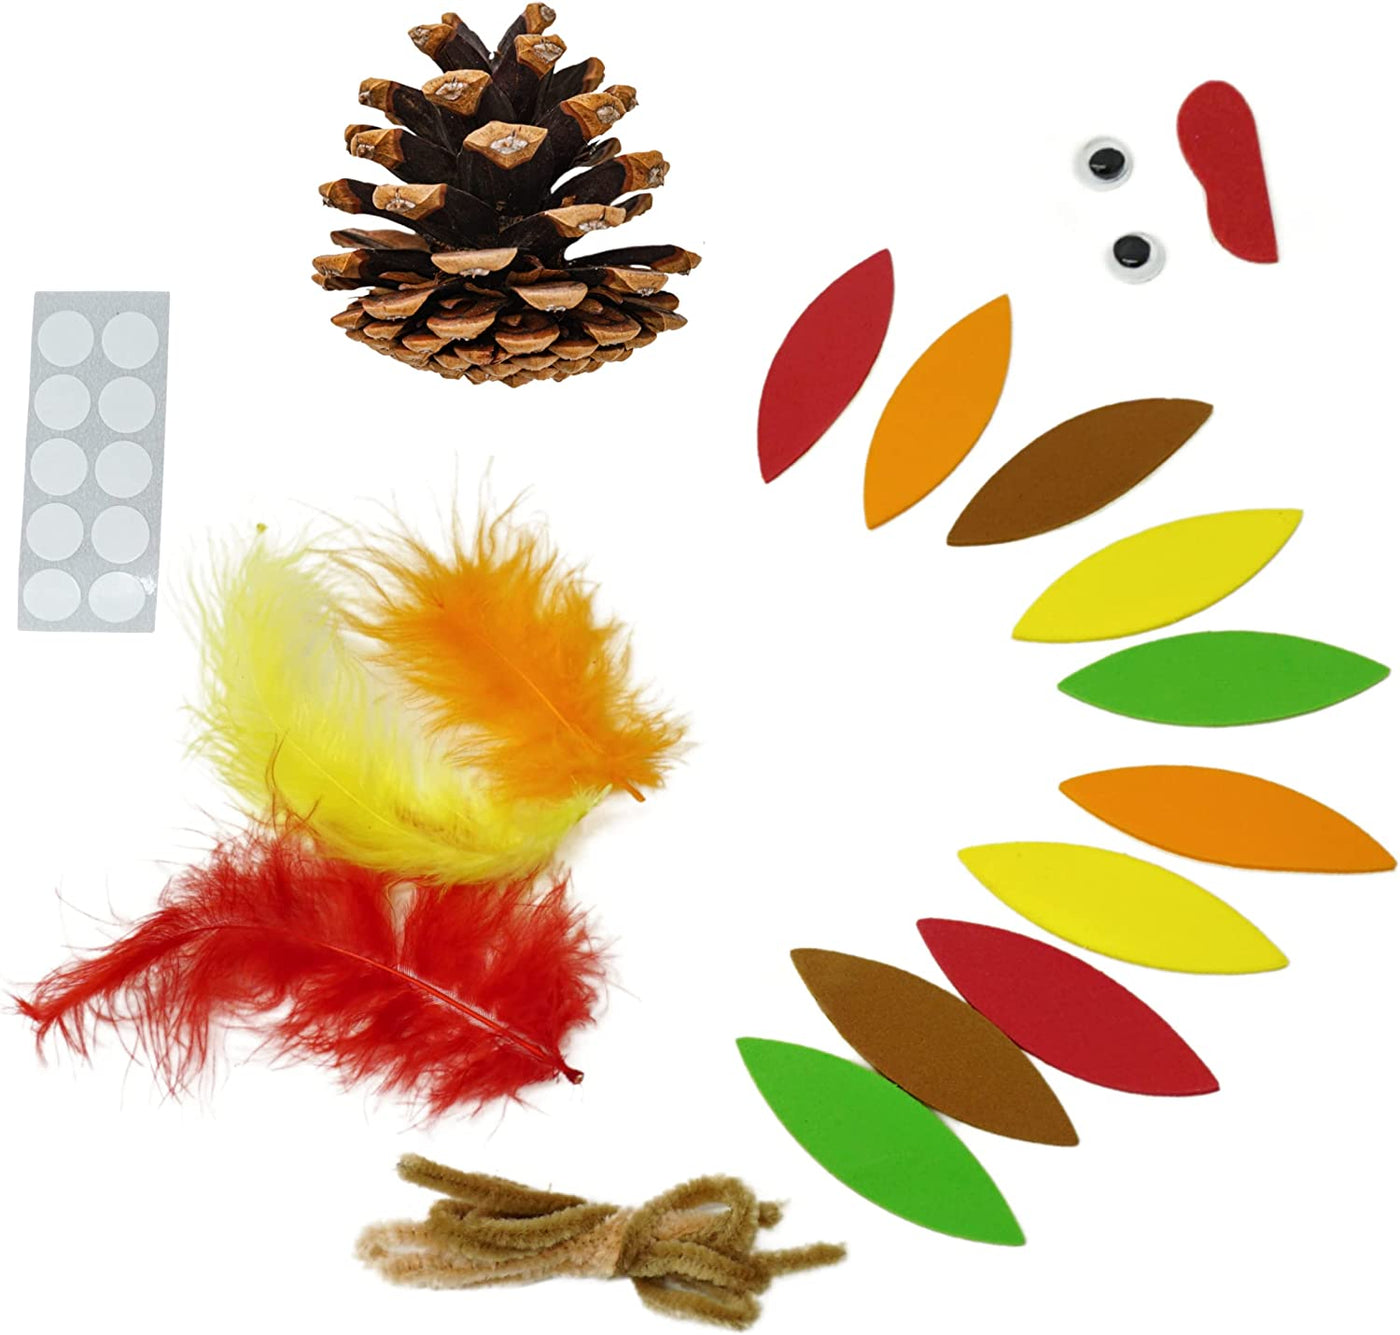 4E's Novelty Pinecone Turkey Craft Kit (12 Pack) DIY Thanksgiving Crafts for Kids , Teens, Adults, Thanksgiving Dinner Activity, Classroom Project, Table Centerpiece Decorations